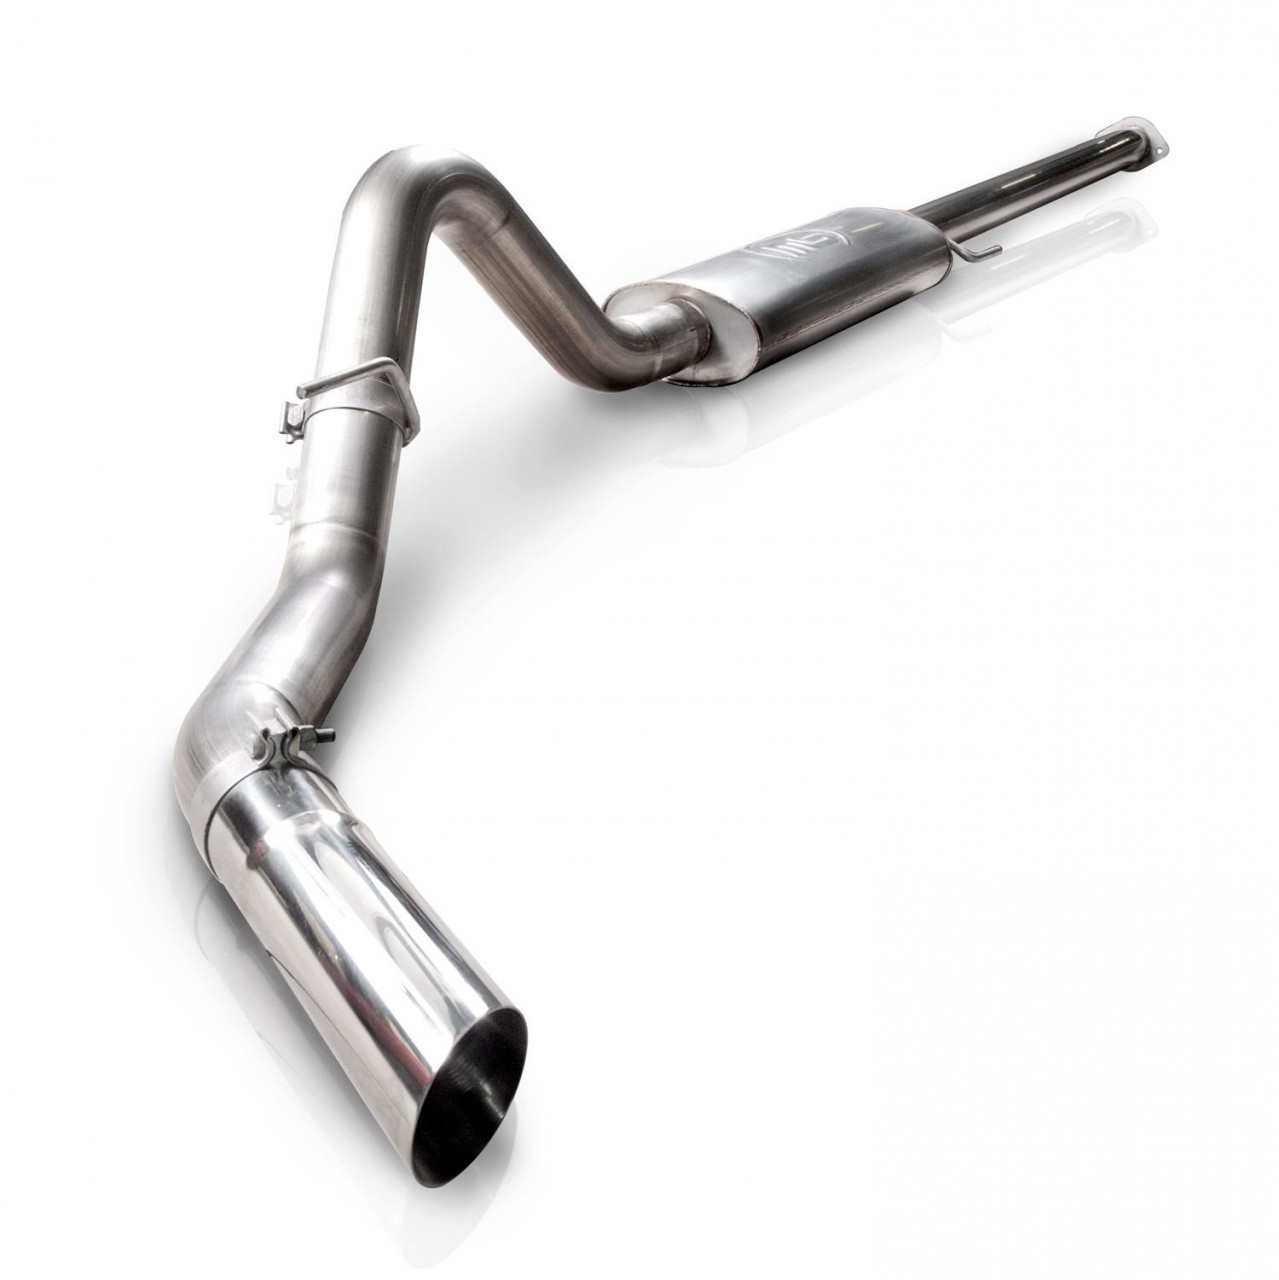 STAINLESS WORKS Ford F-150 Ecoboost 2011-13 3.5L S-Tube Turbo Exhaust